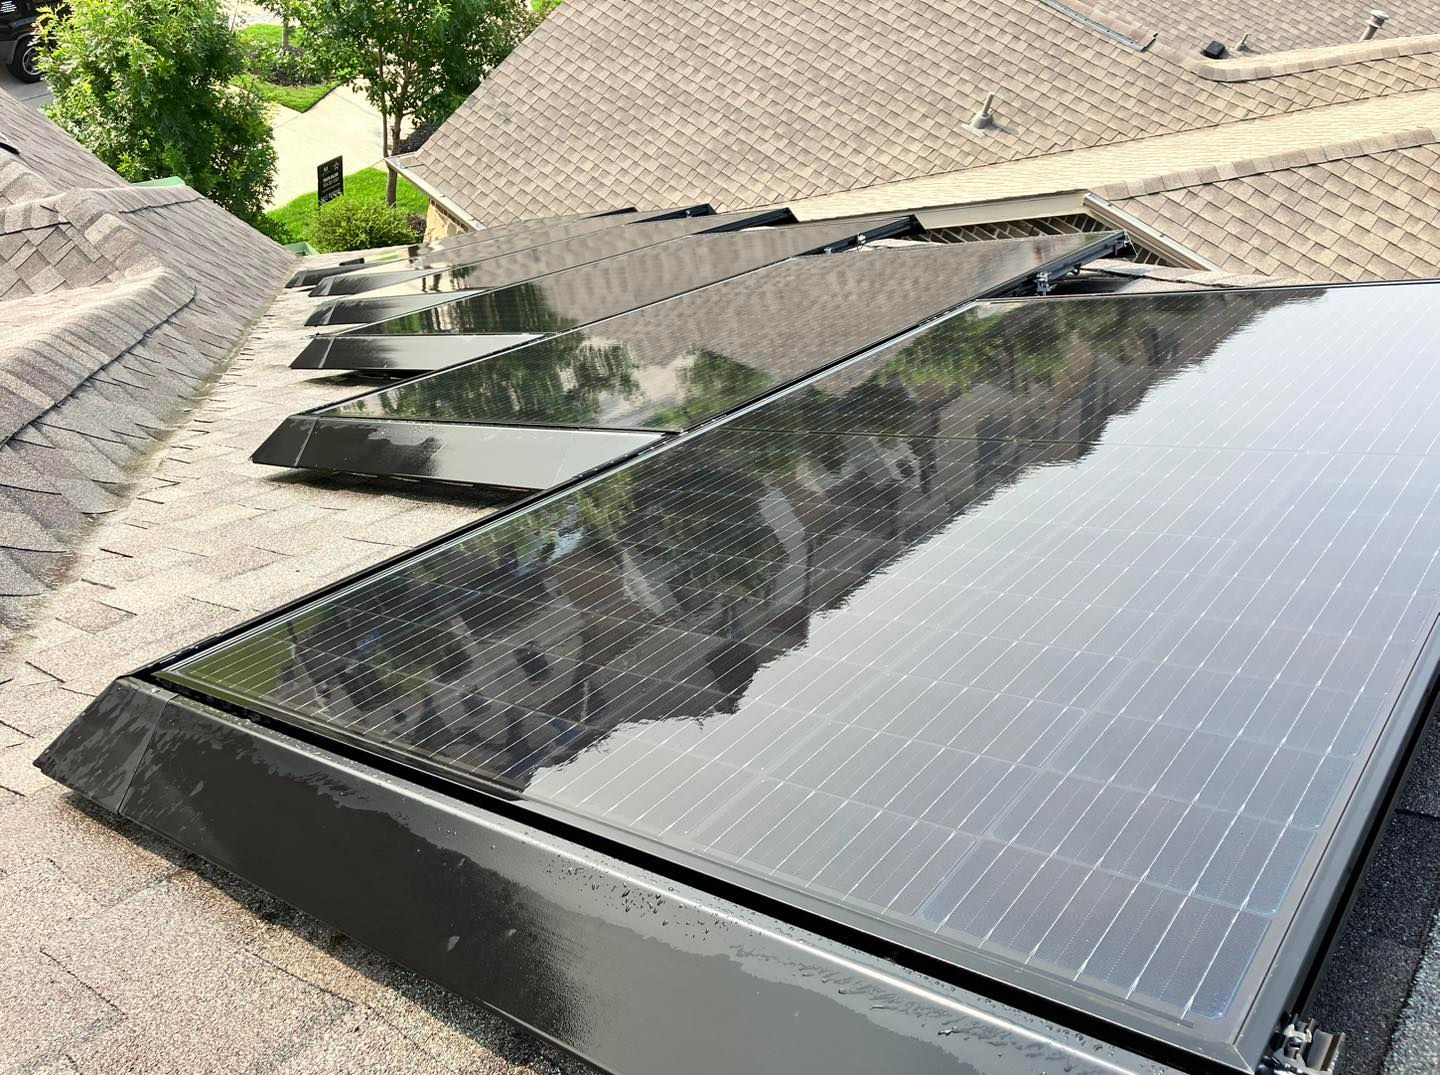 Solar panels in Anaheim Hills homes gleam radiantly after our thorough expert cleaning.